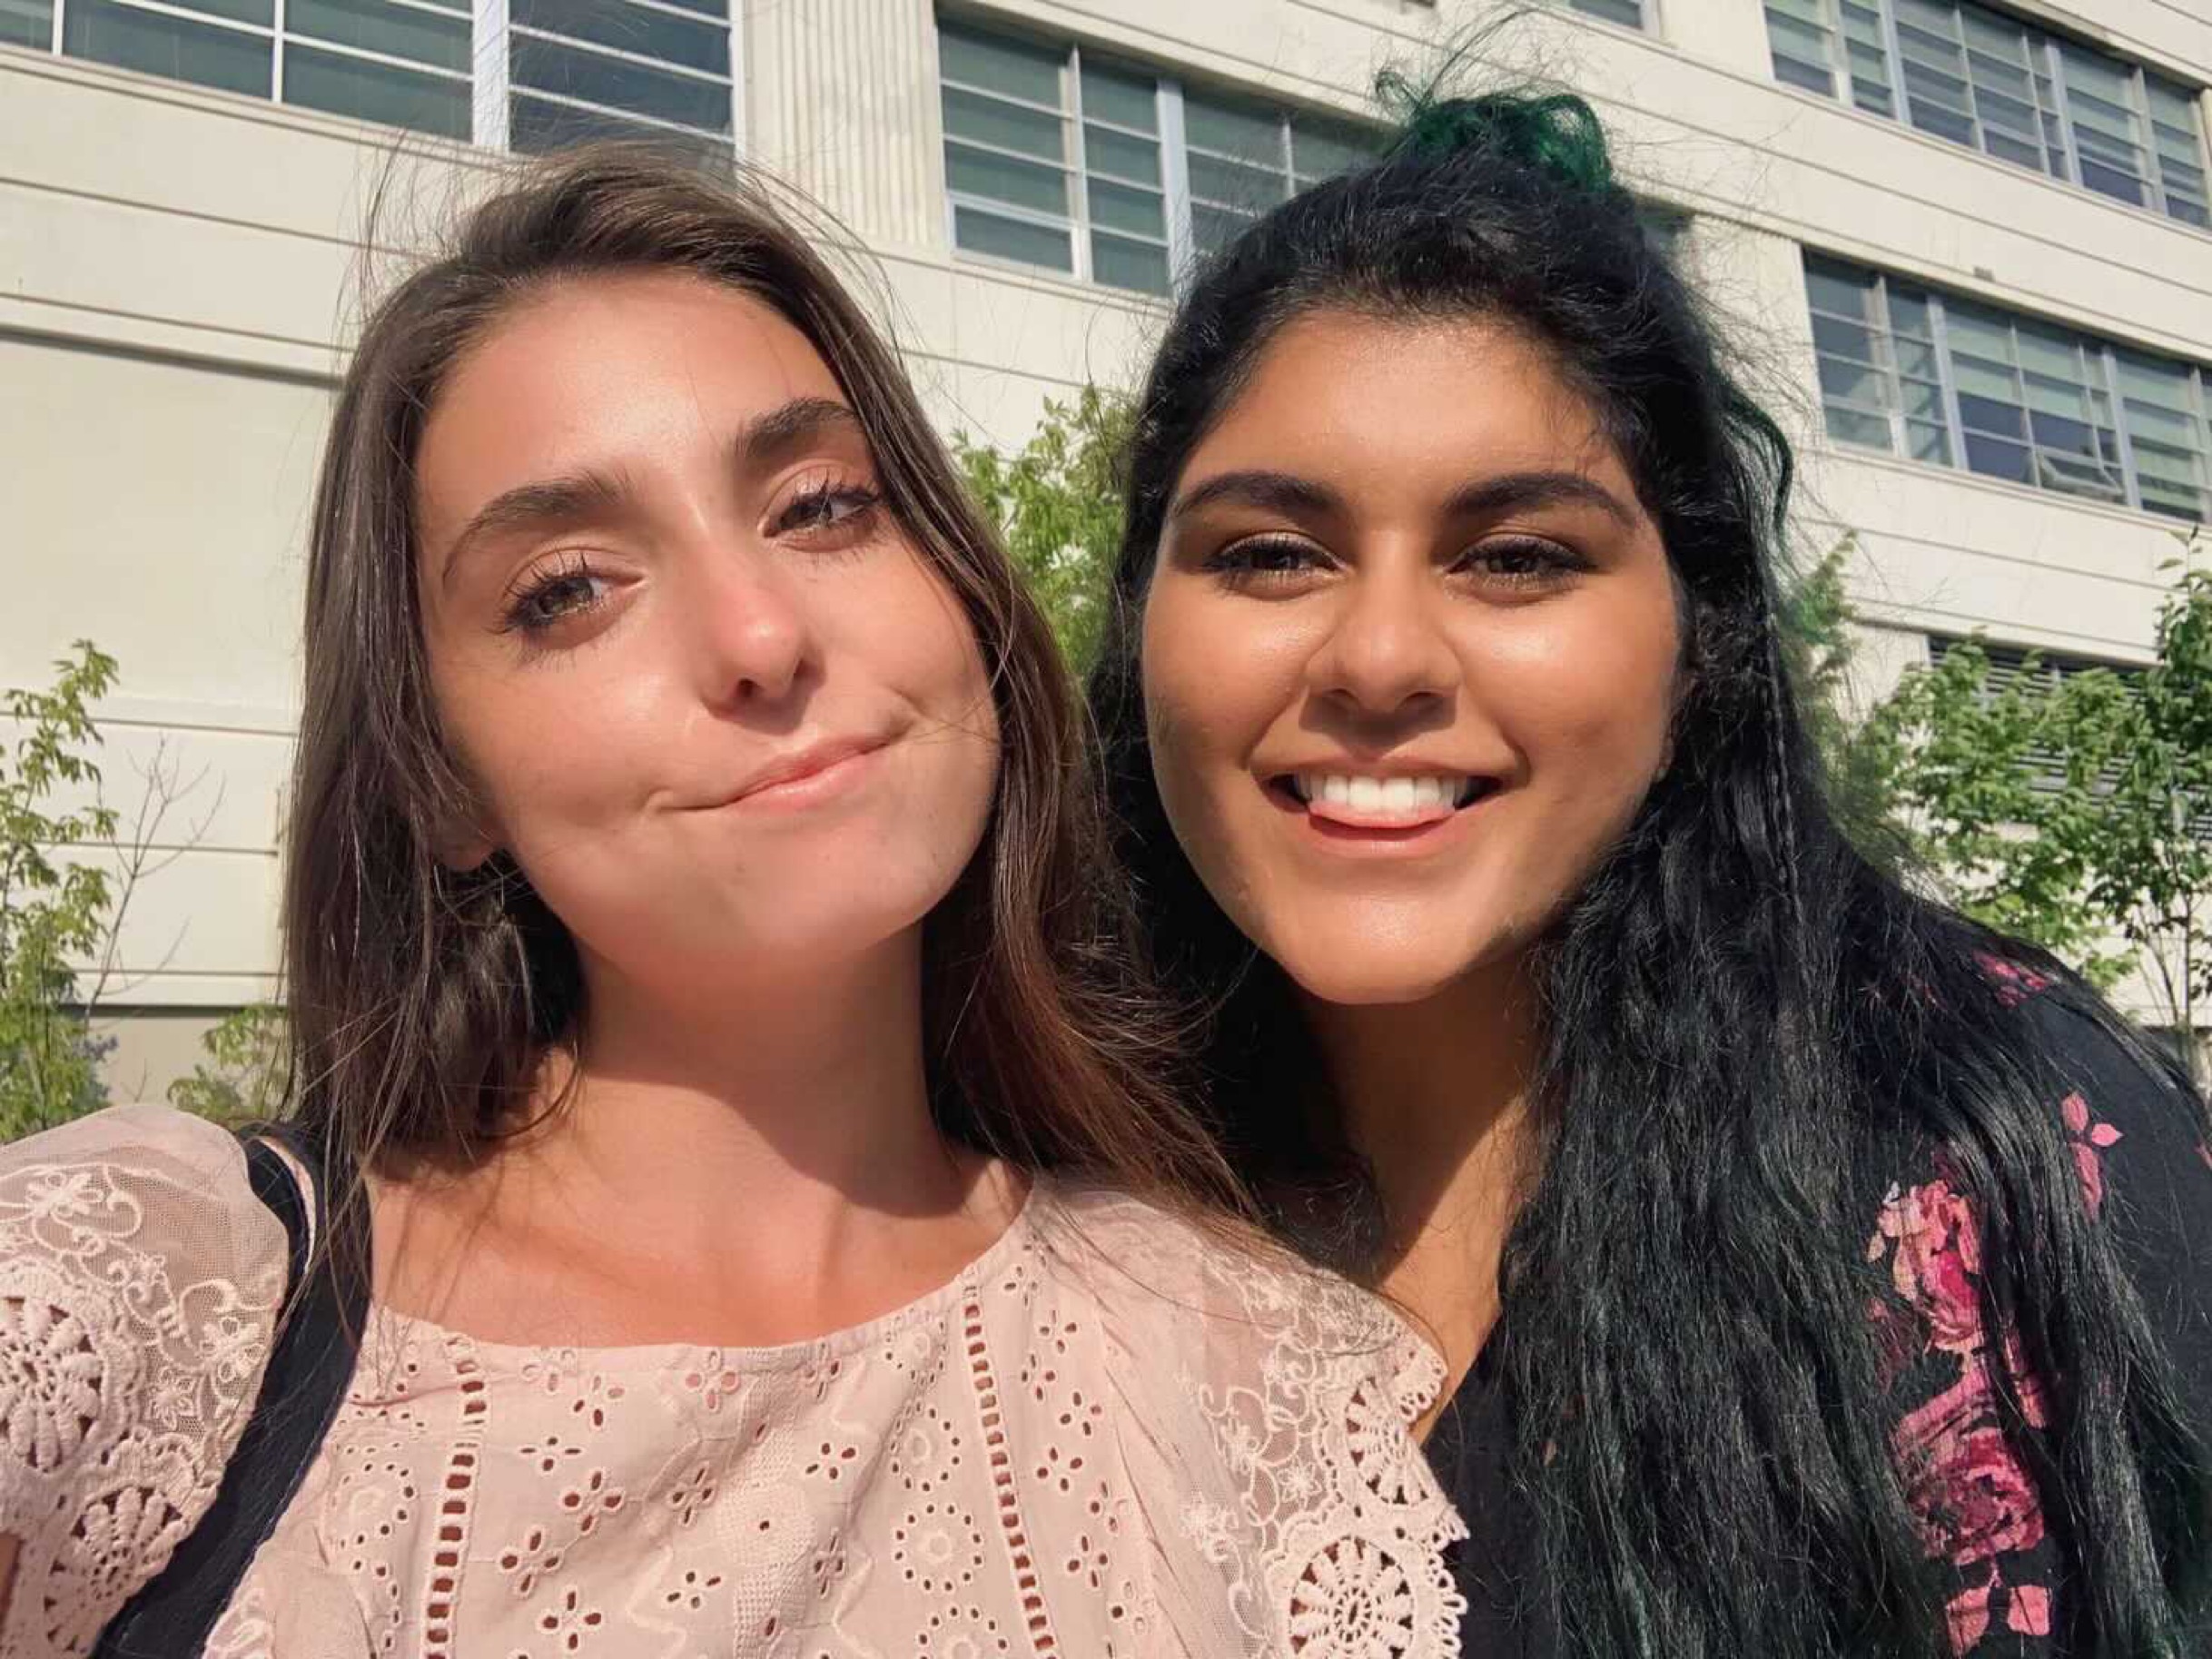 Hannah with her best friend from high school